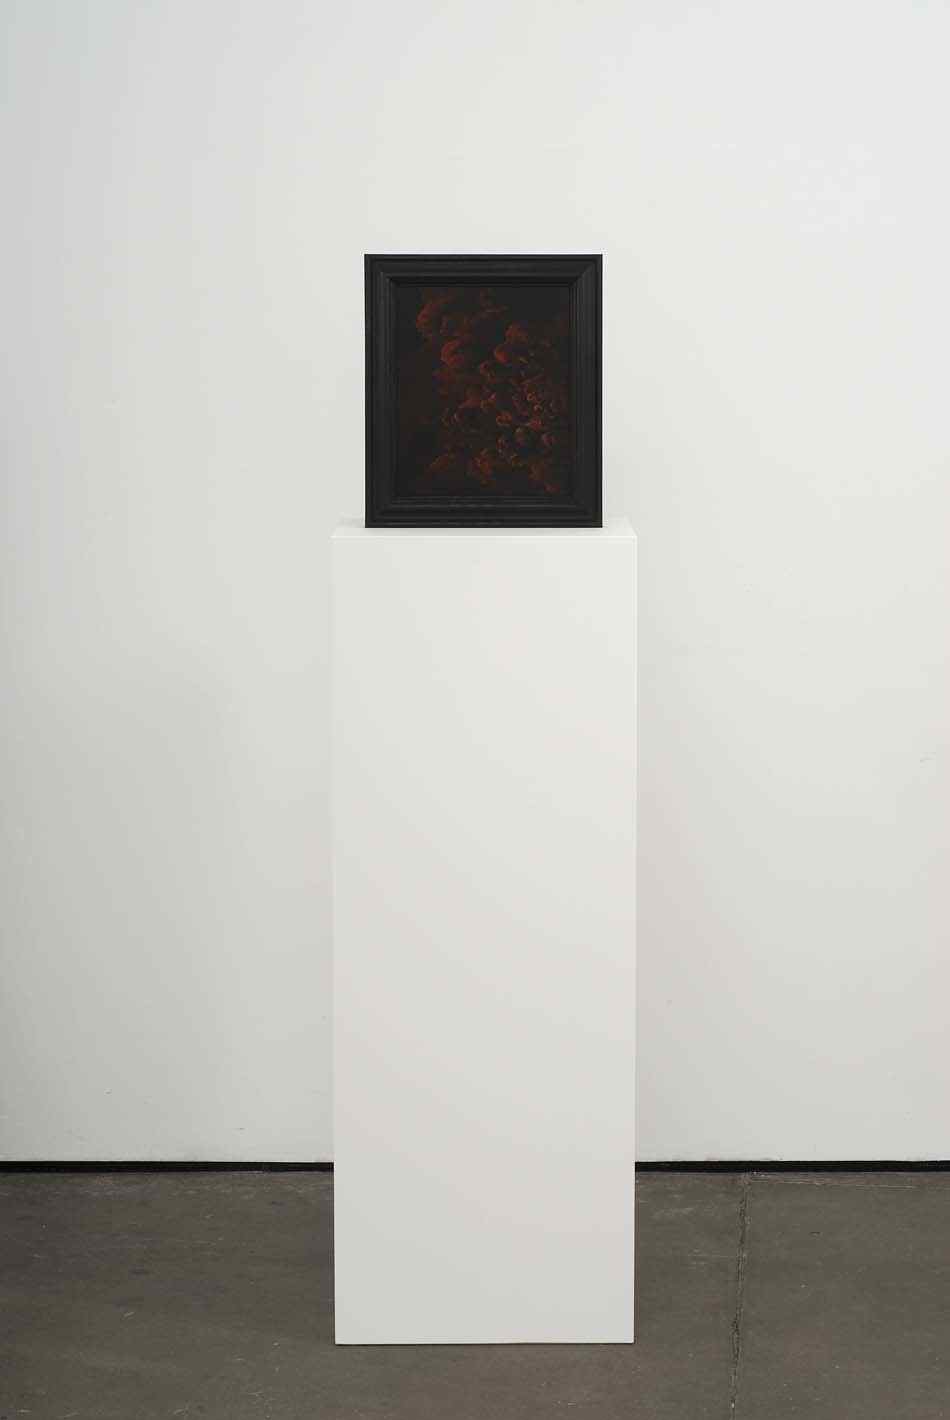      The Gate (Nowhere in Particular)   2009   Double-sided acrylic on board in artists frame mounted on pedestal   147.3 x 40 x 28cm  